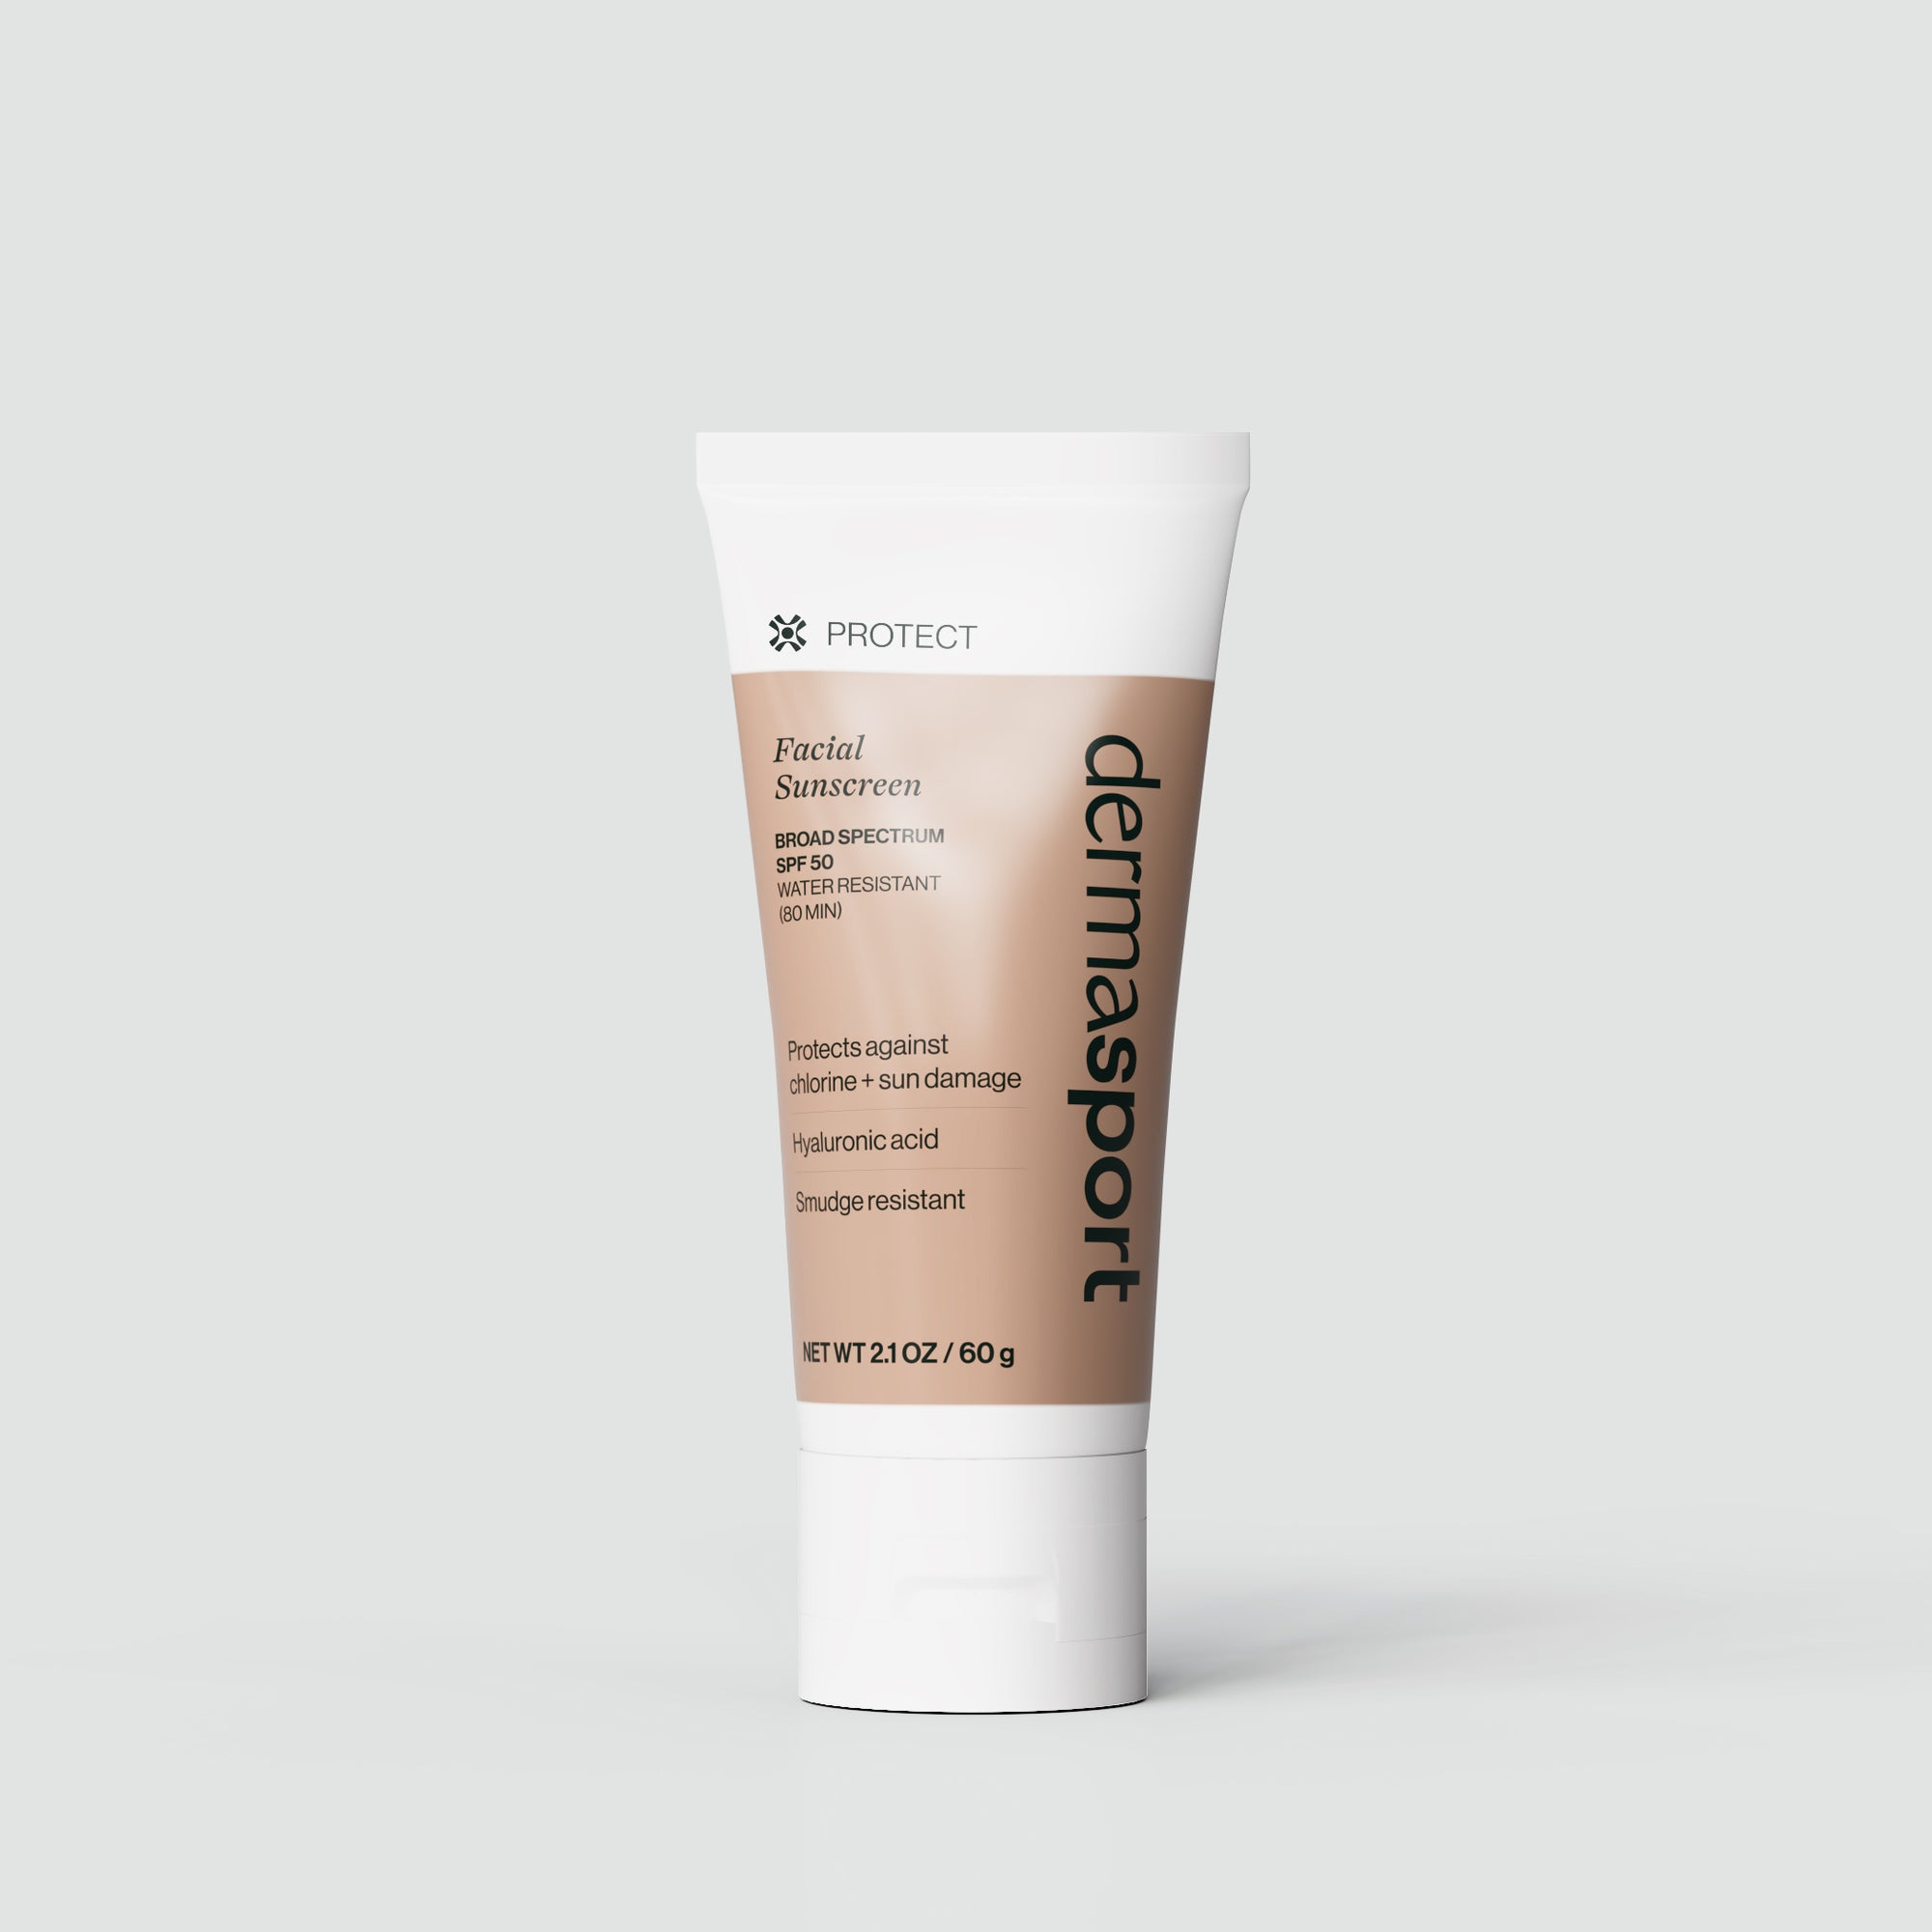 Dermasport's SPF 50 Facial Sunscreen offers water-resistant sun protection that doesn't wash off when you dive in. 